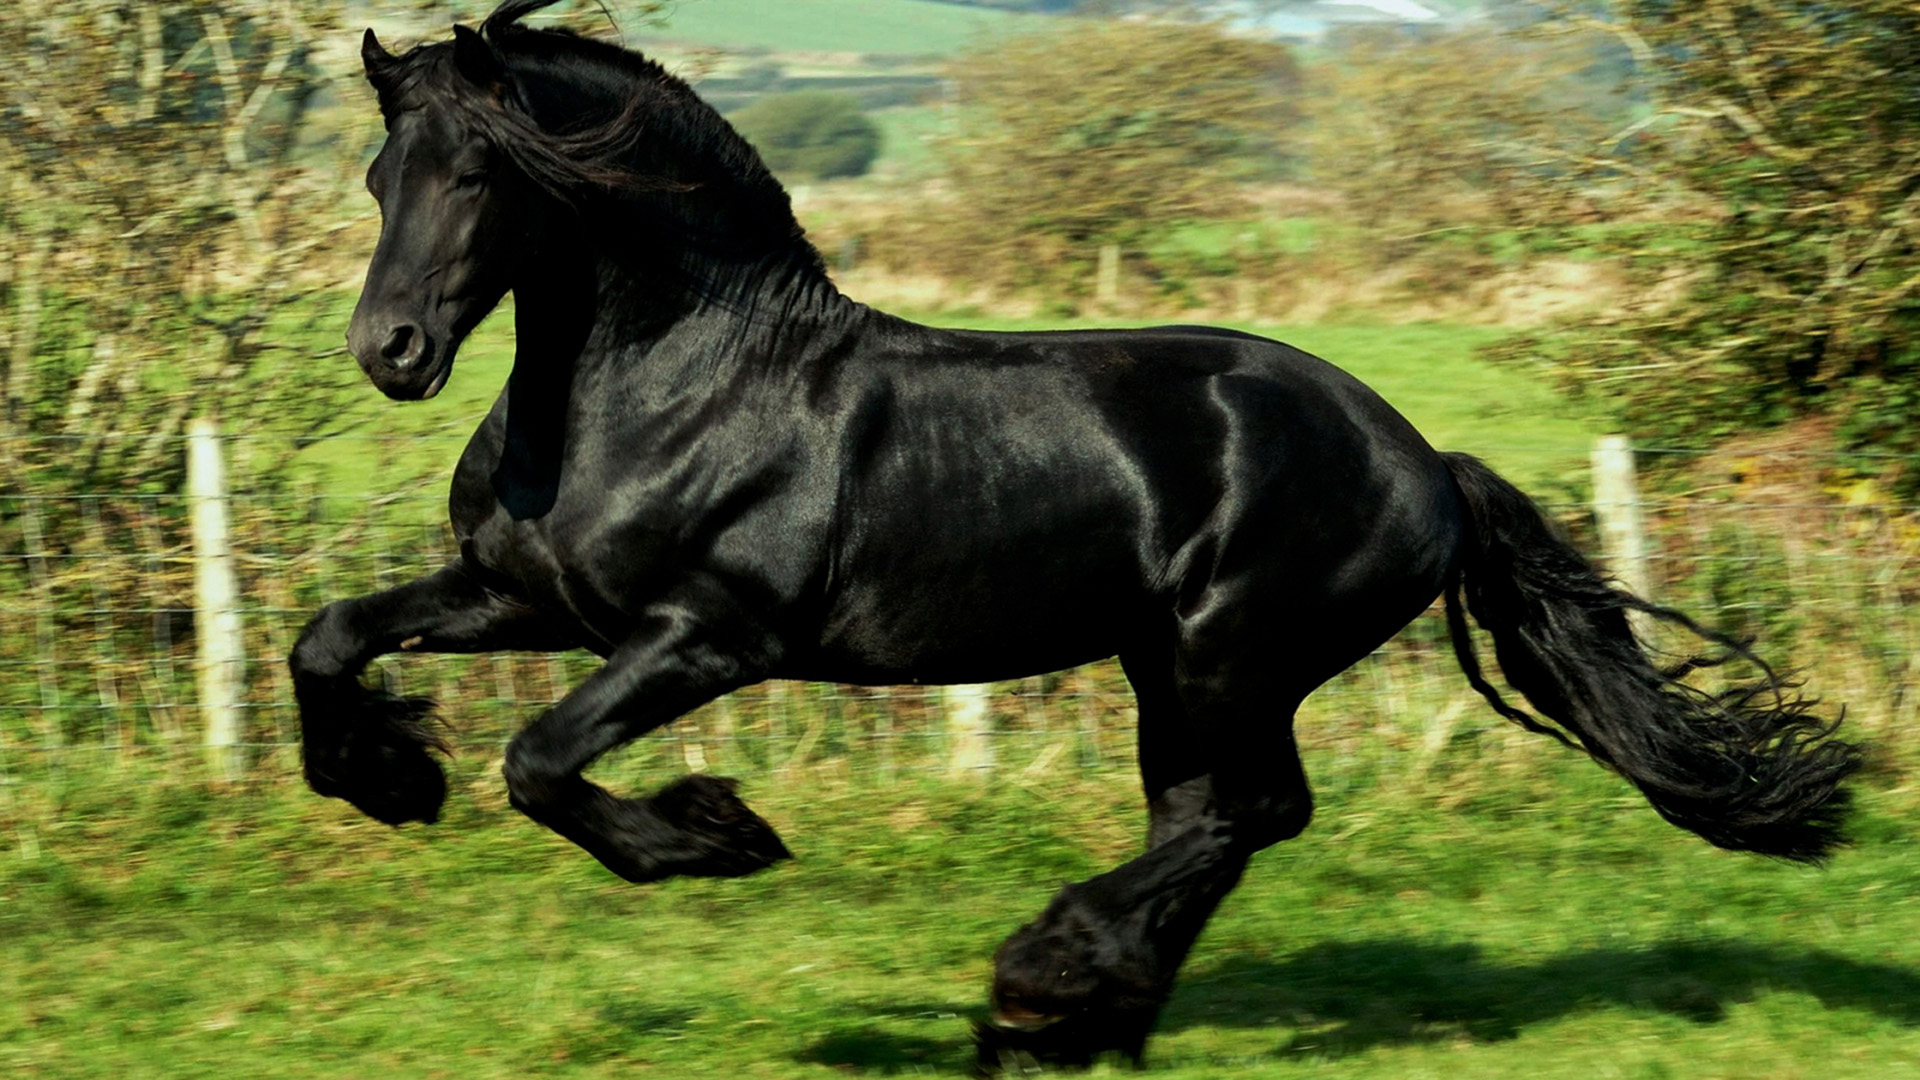 Wallpaper Hd Caballo Negro - Most Gorgeous Horse Ever , HD Wallpaper & Backgrounds